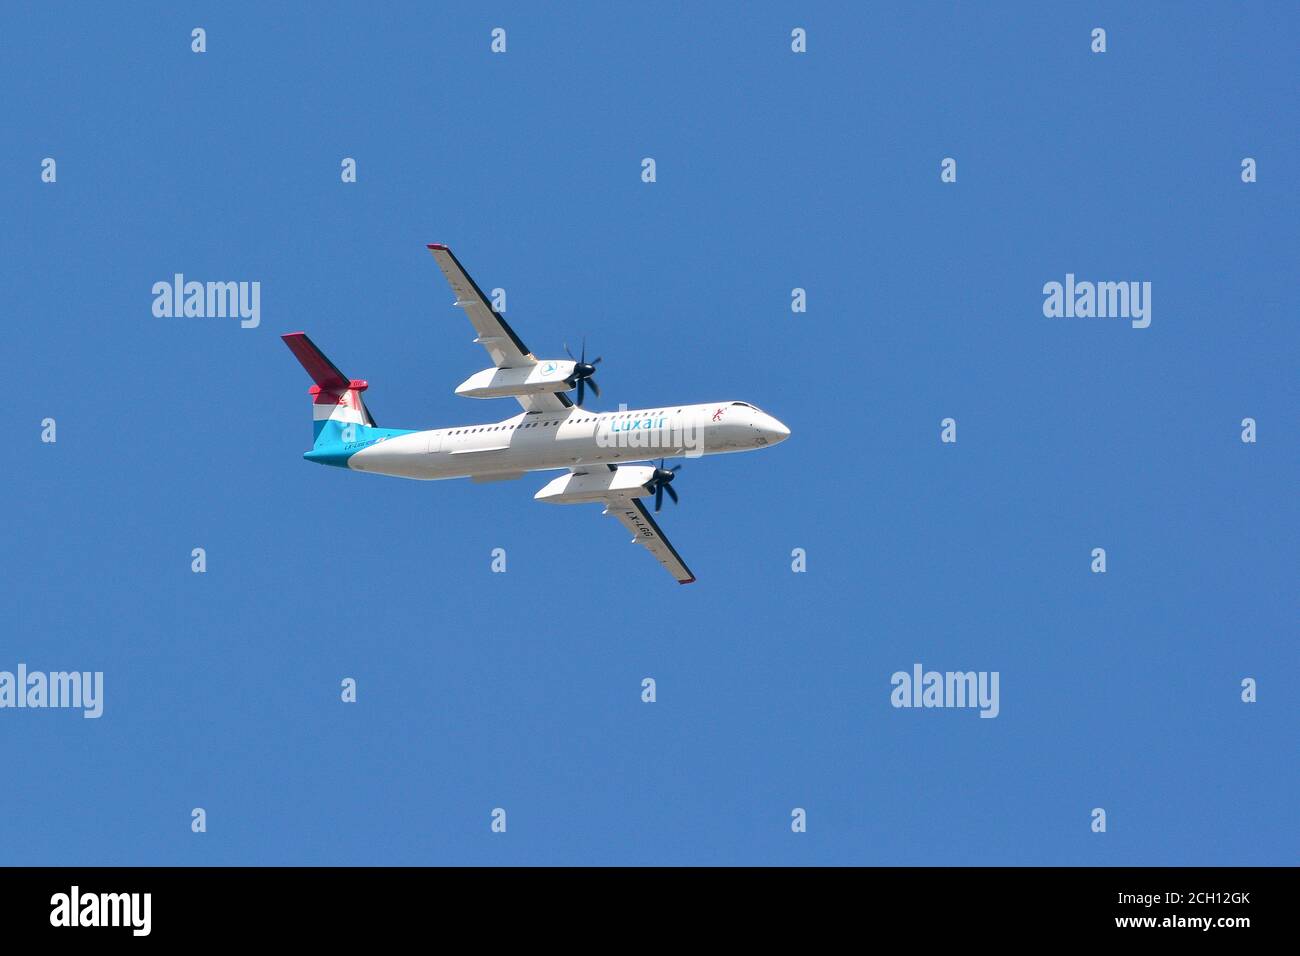 Luxair (is the flag carrier airline of Luxembourg), De Havilland Canada Dash airplane Stock Photo